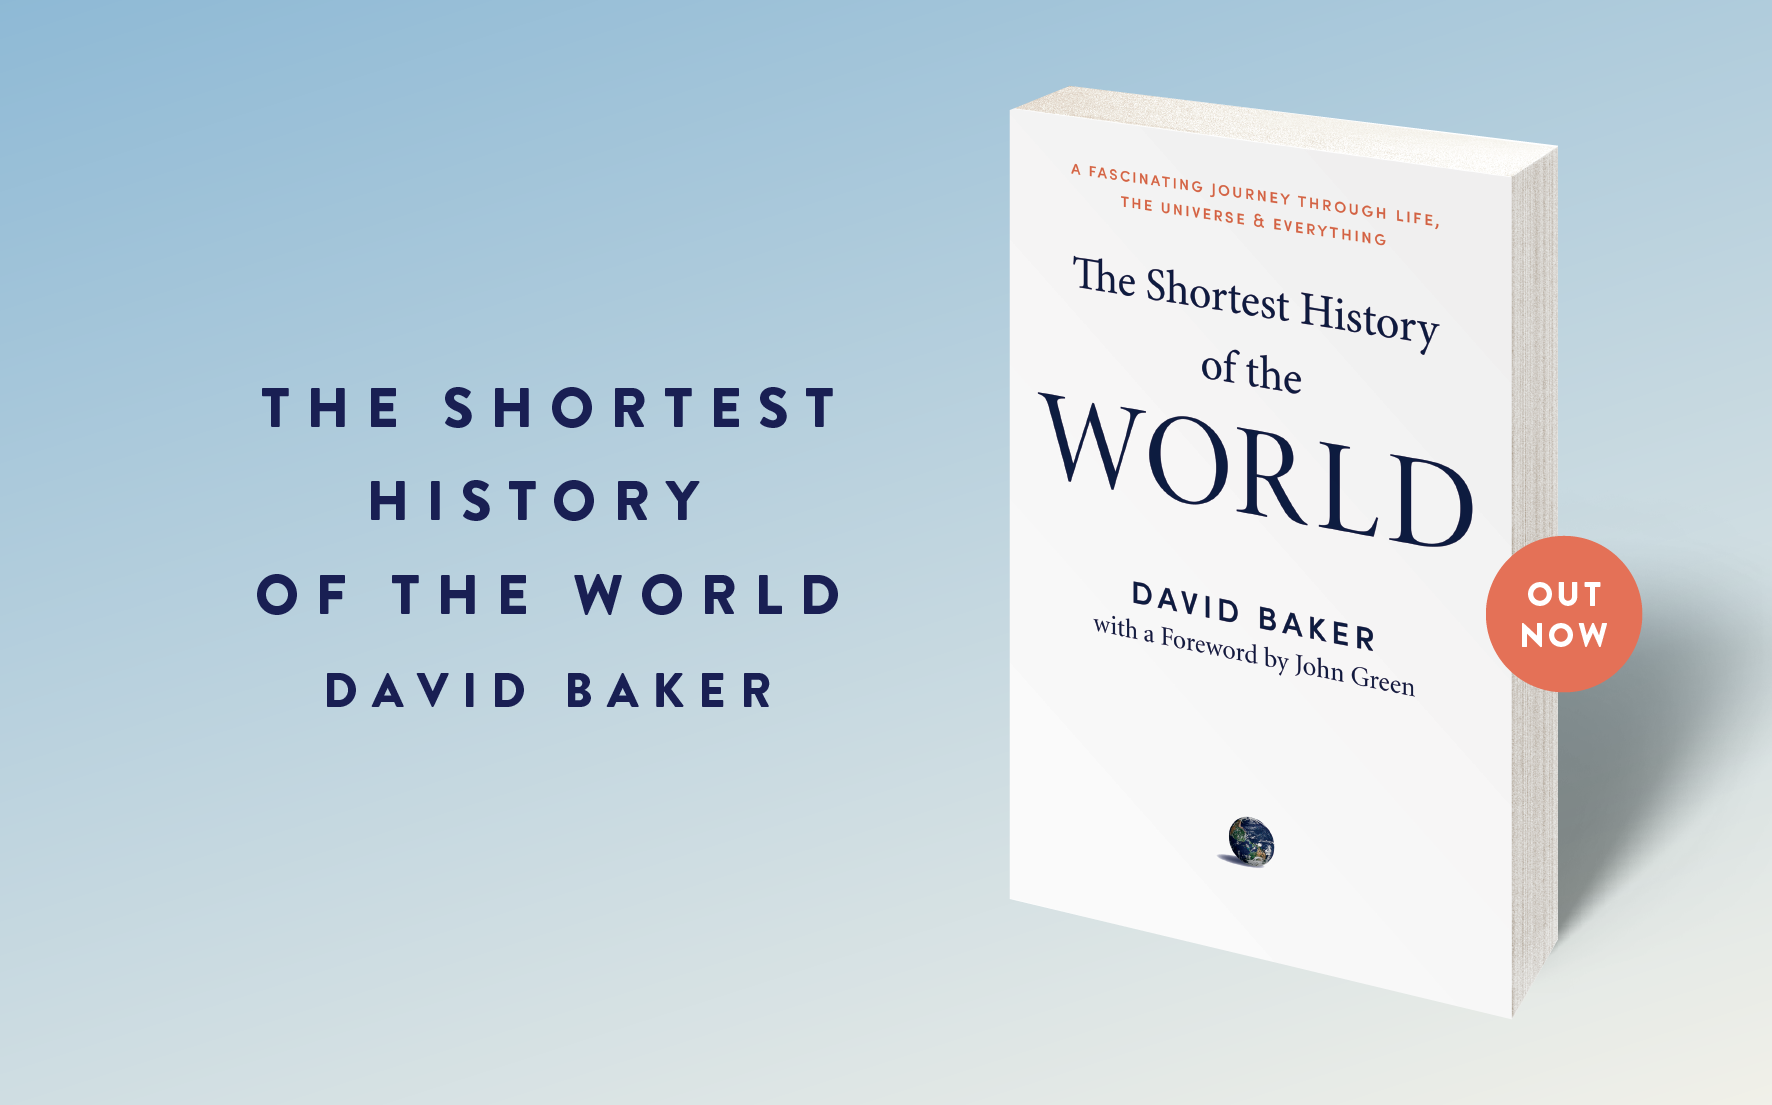 Out now: The Shortest History of the World